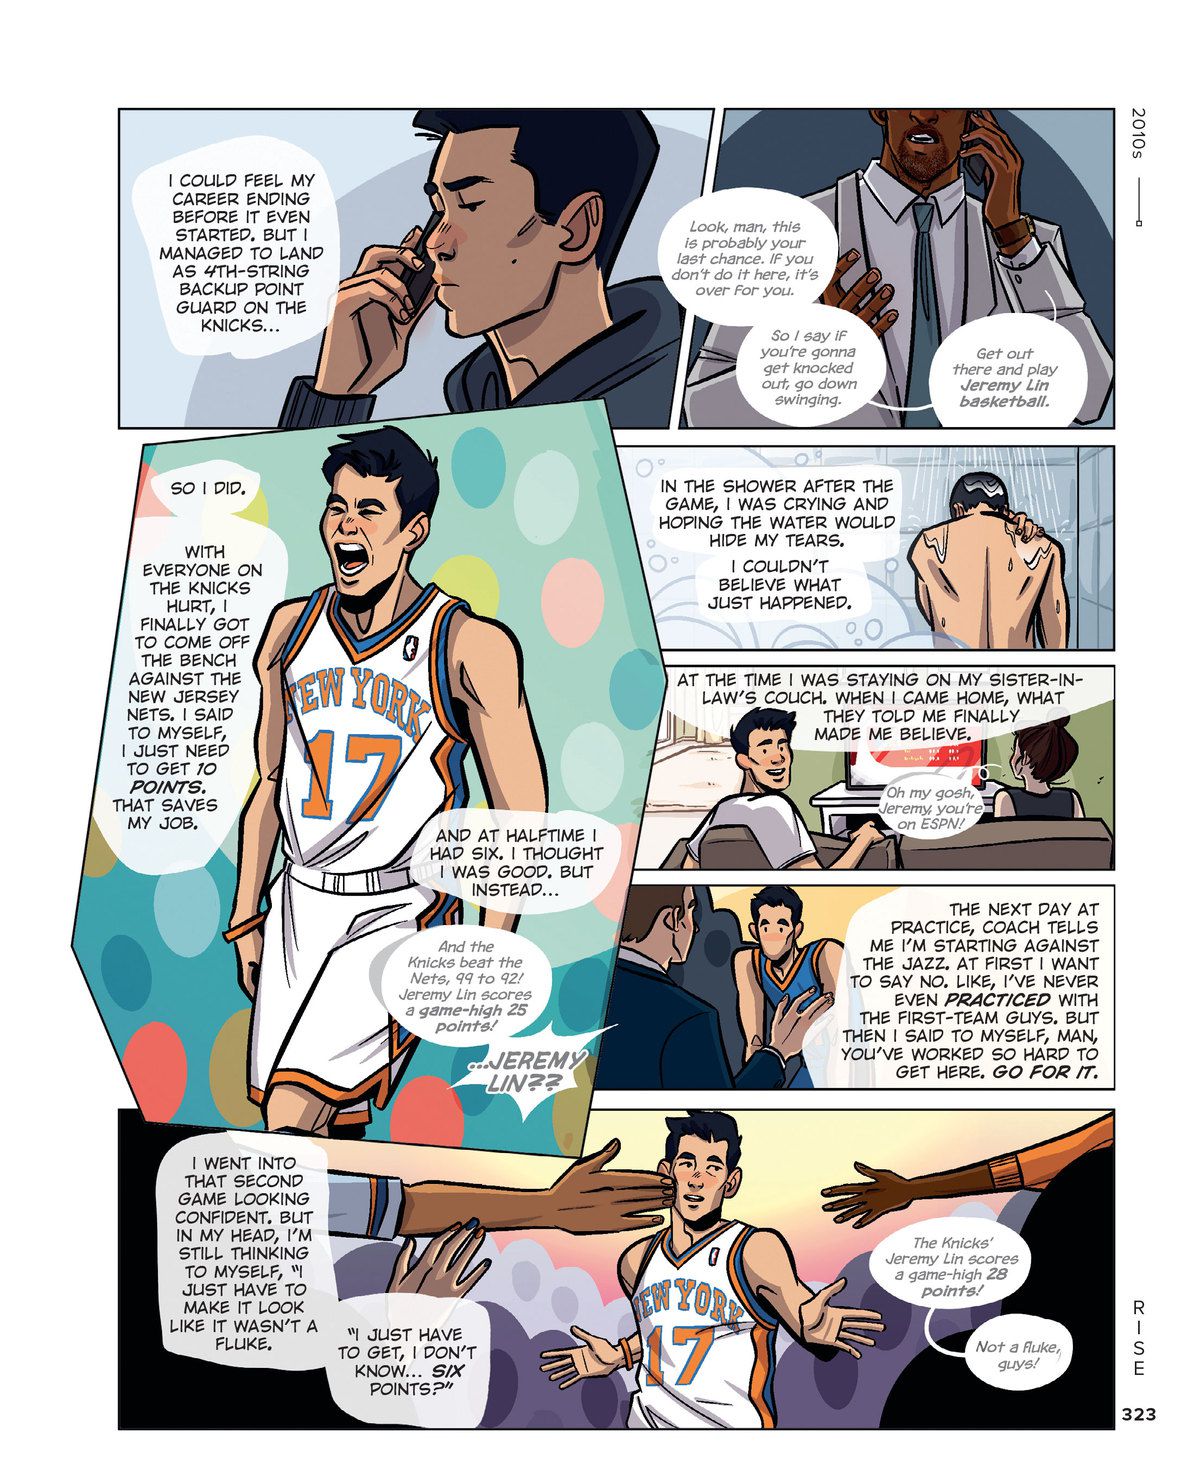 Page 2 of 4. Lin is riding the bench with the Knicks. His agent had told him that he would probably be cut if he didn’t have a breakthrough performance. Soon after that, in a game against the Nets, Lin got solid playing time and ended up with 25 points. This was the beginning of Linsanity.